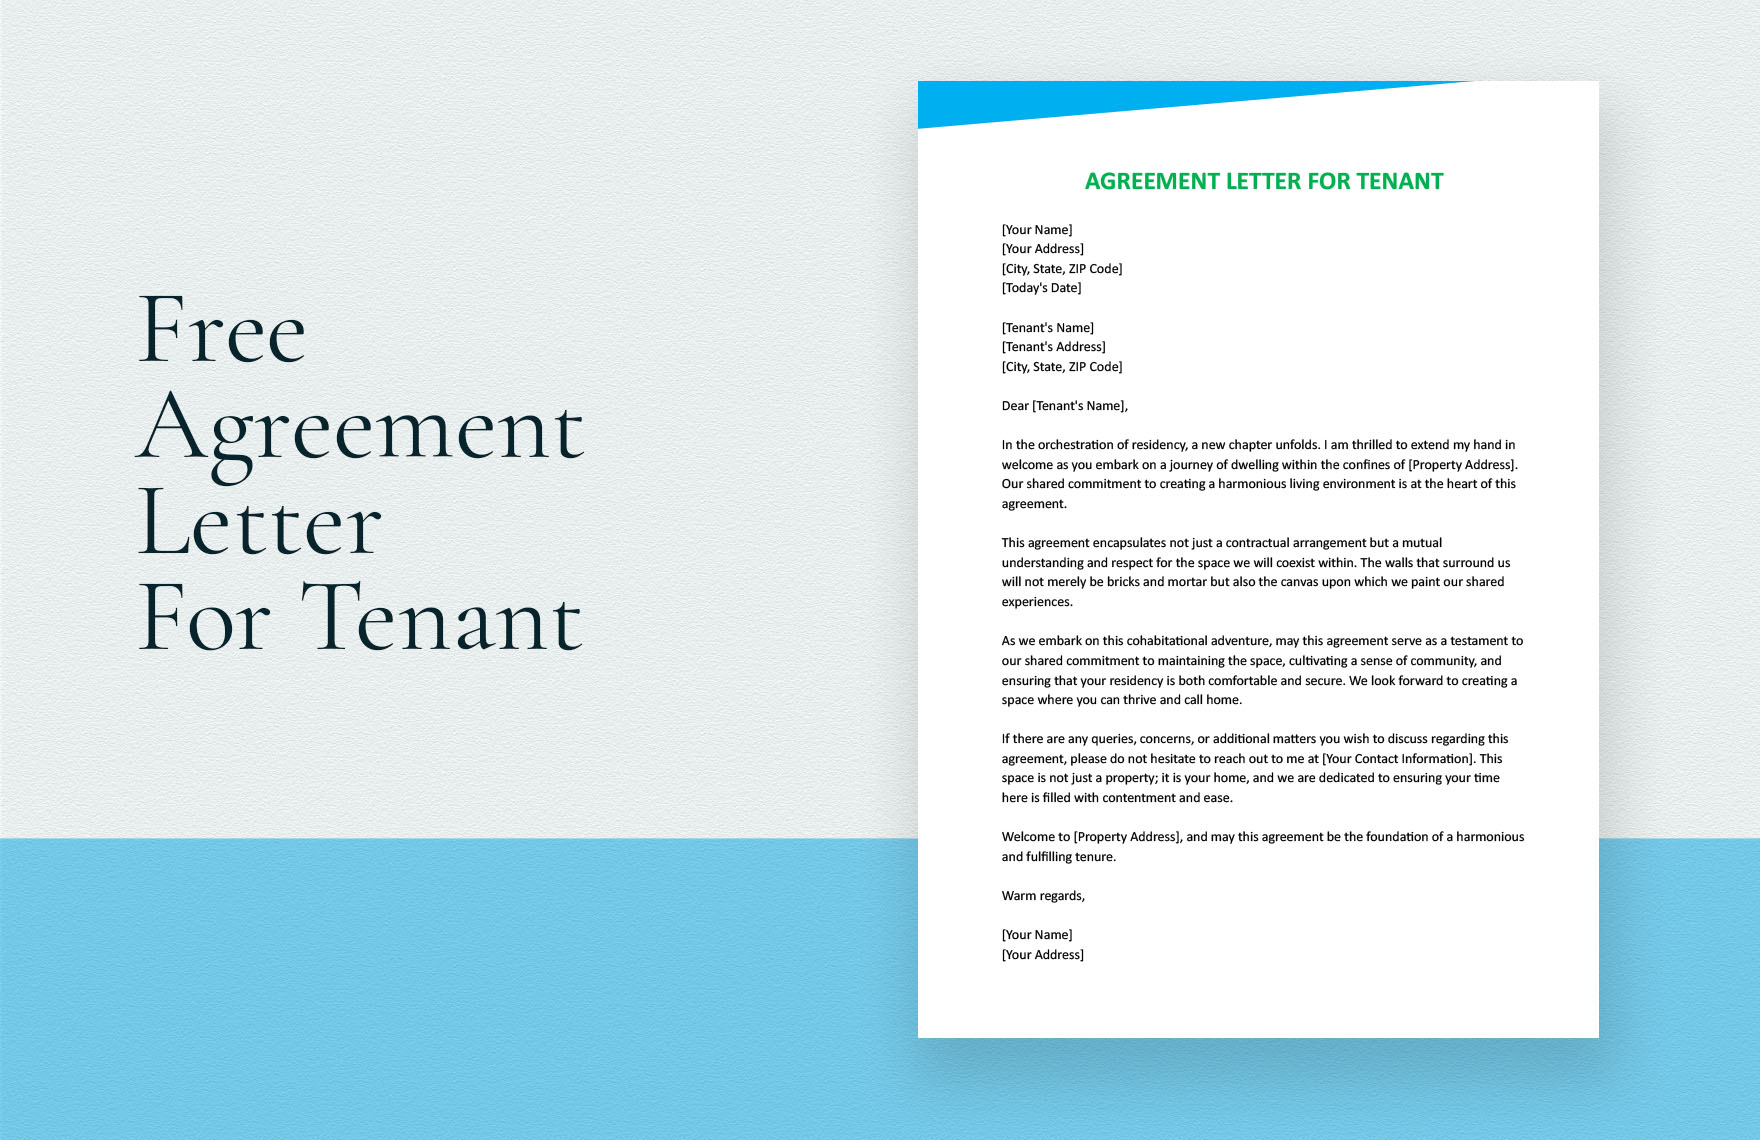 Agreement Letter For Tenant in Word, Google Docs